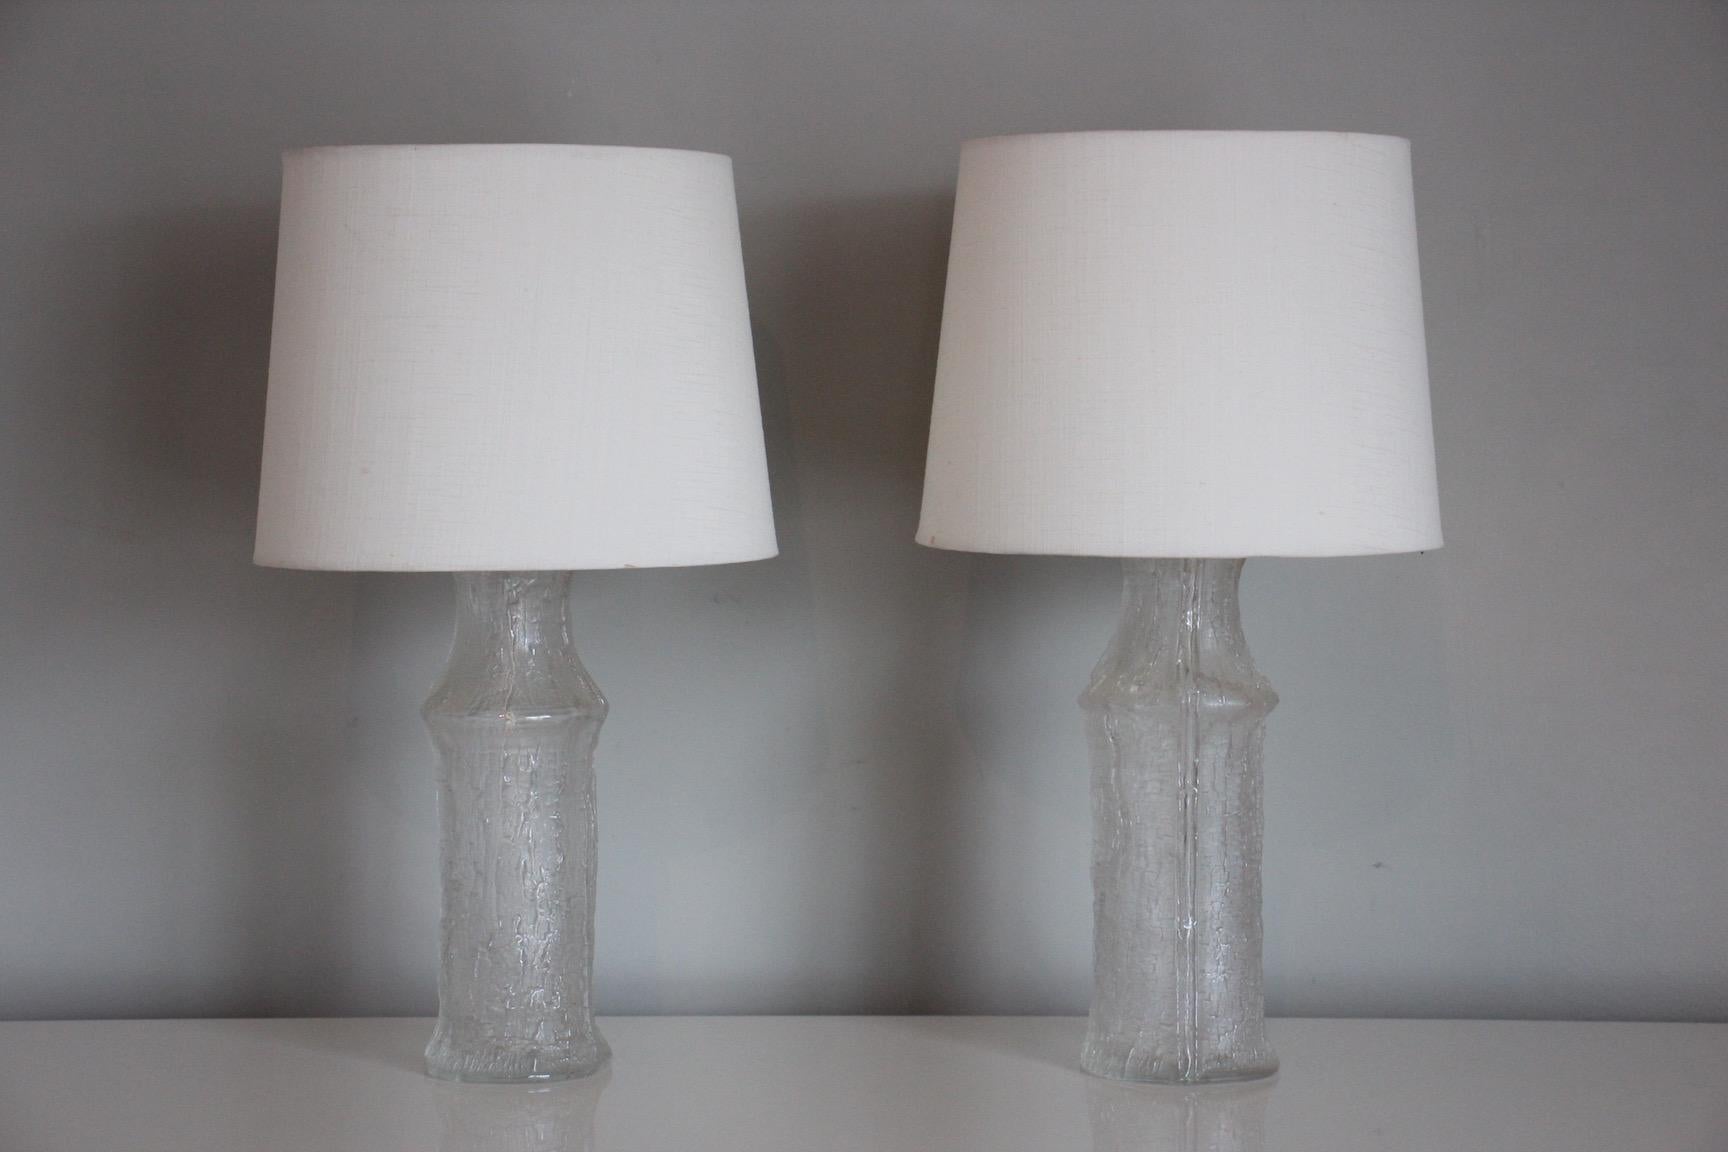 Timo Sarpaneva
(Finnish, 1926-2006)
Pair of Table Lamps, circa 1970, Iittala for Luxus, Finland/Sweden
Mold-blown glass, plastic, linen
Retailers foil label to underside.